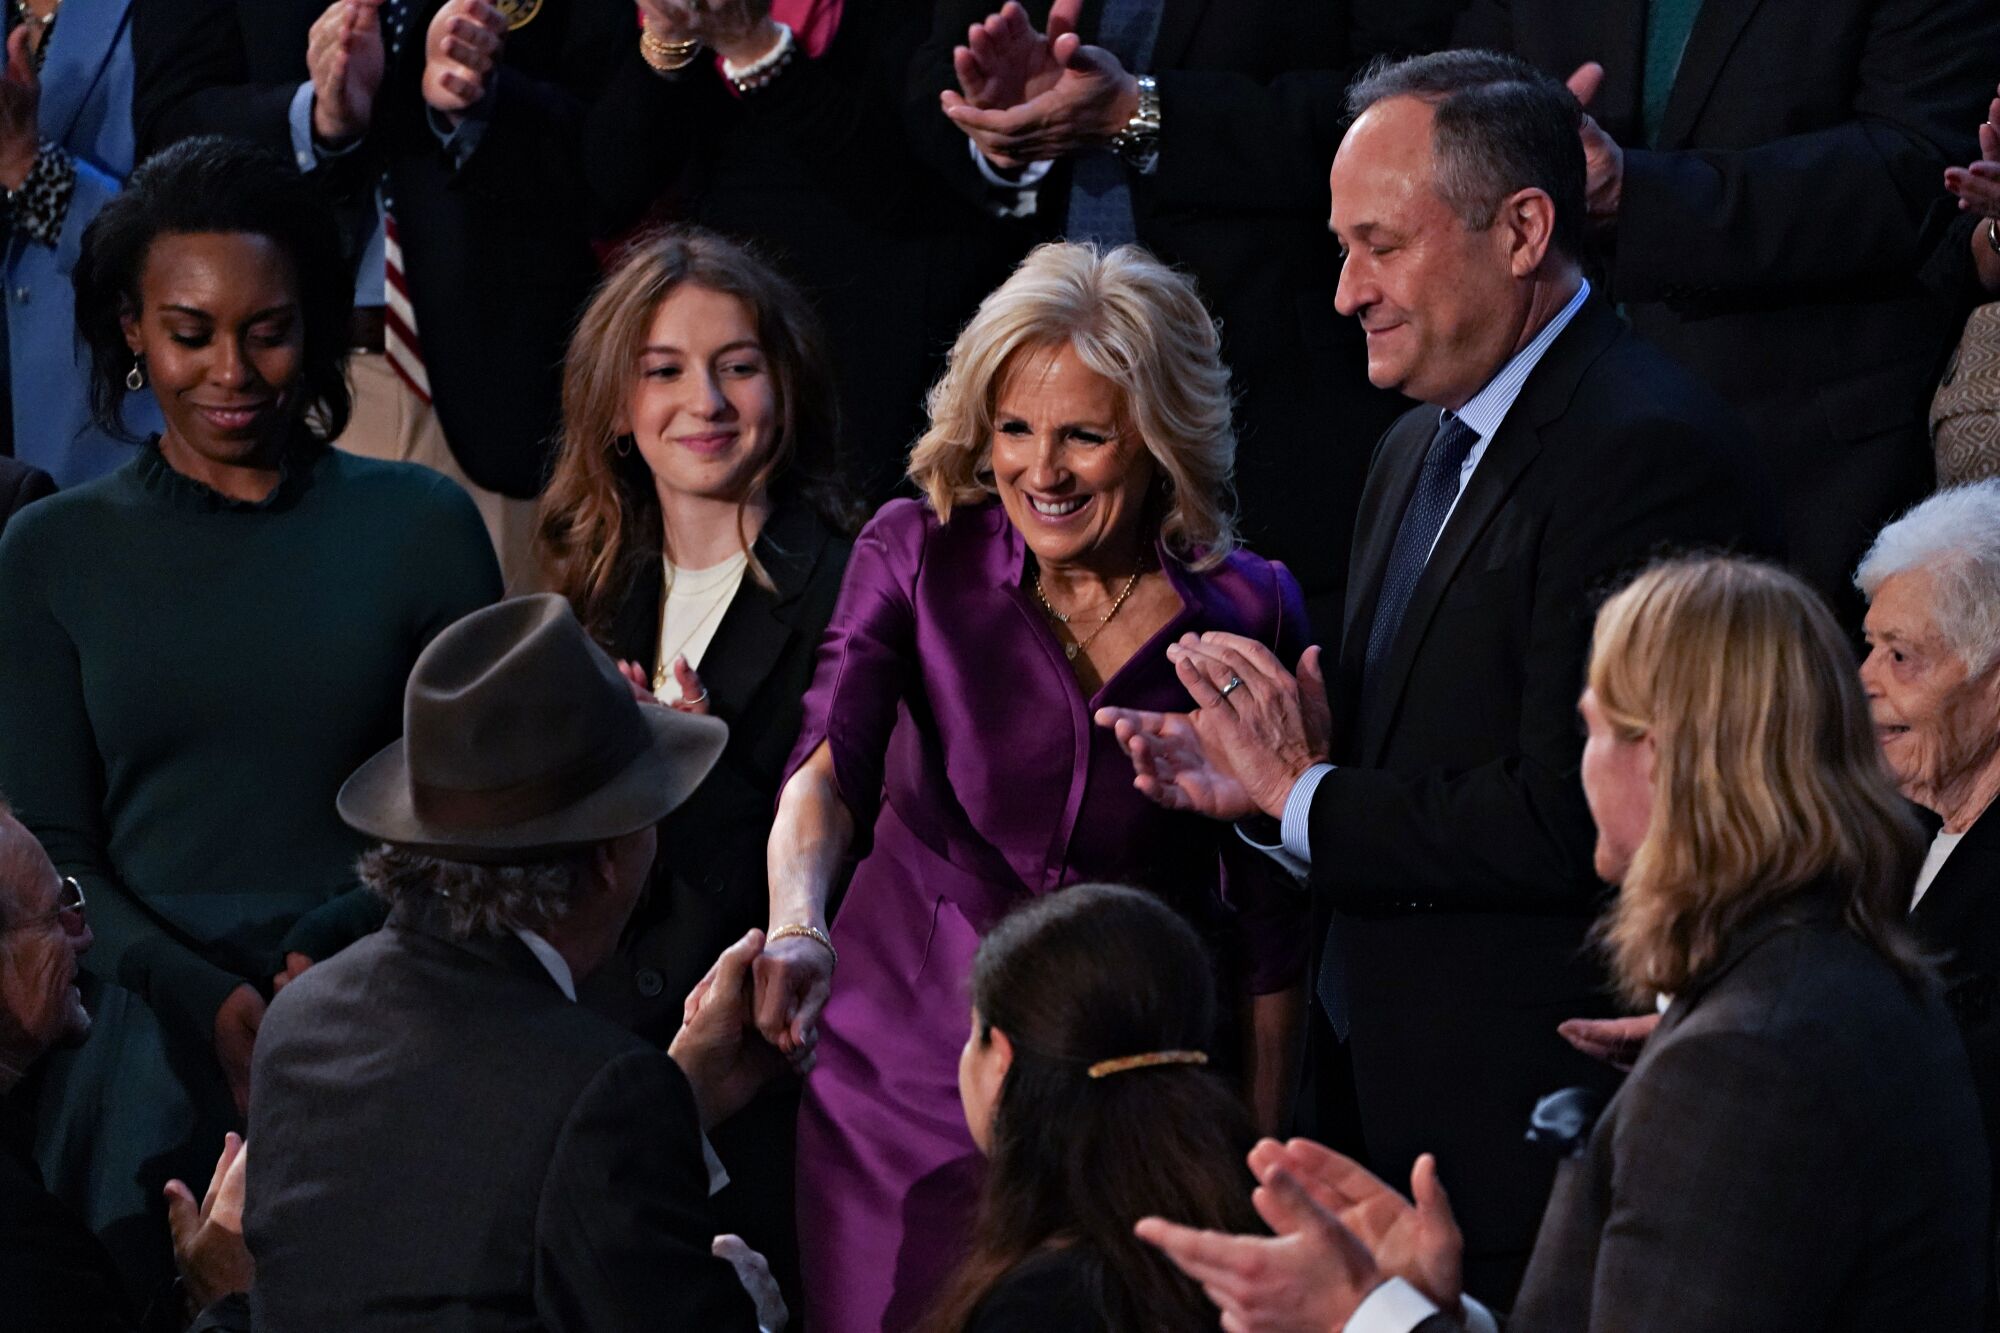 First Lady Jill Biden greets supporters.